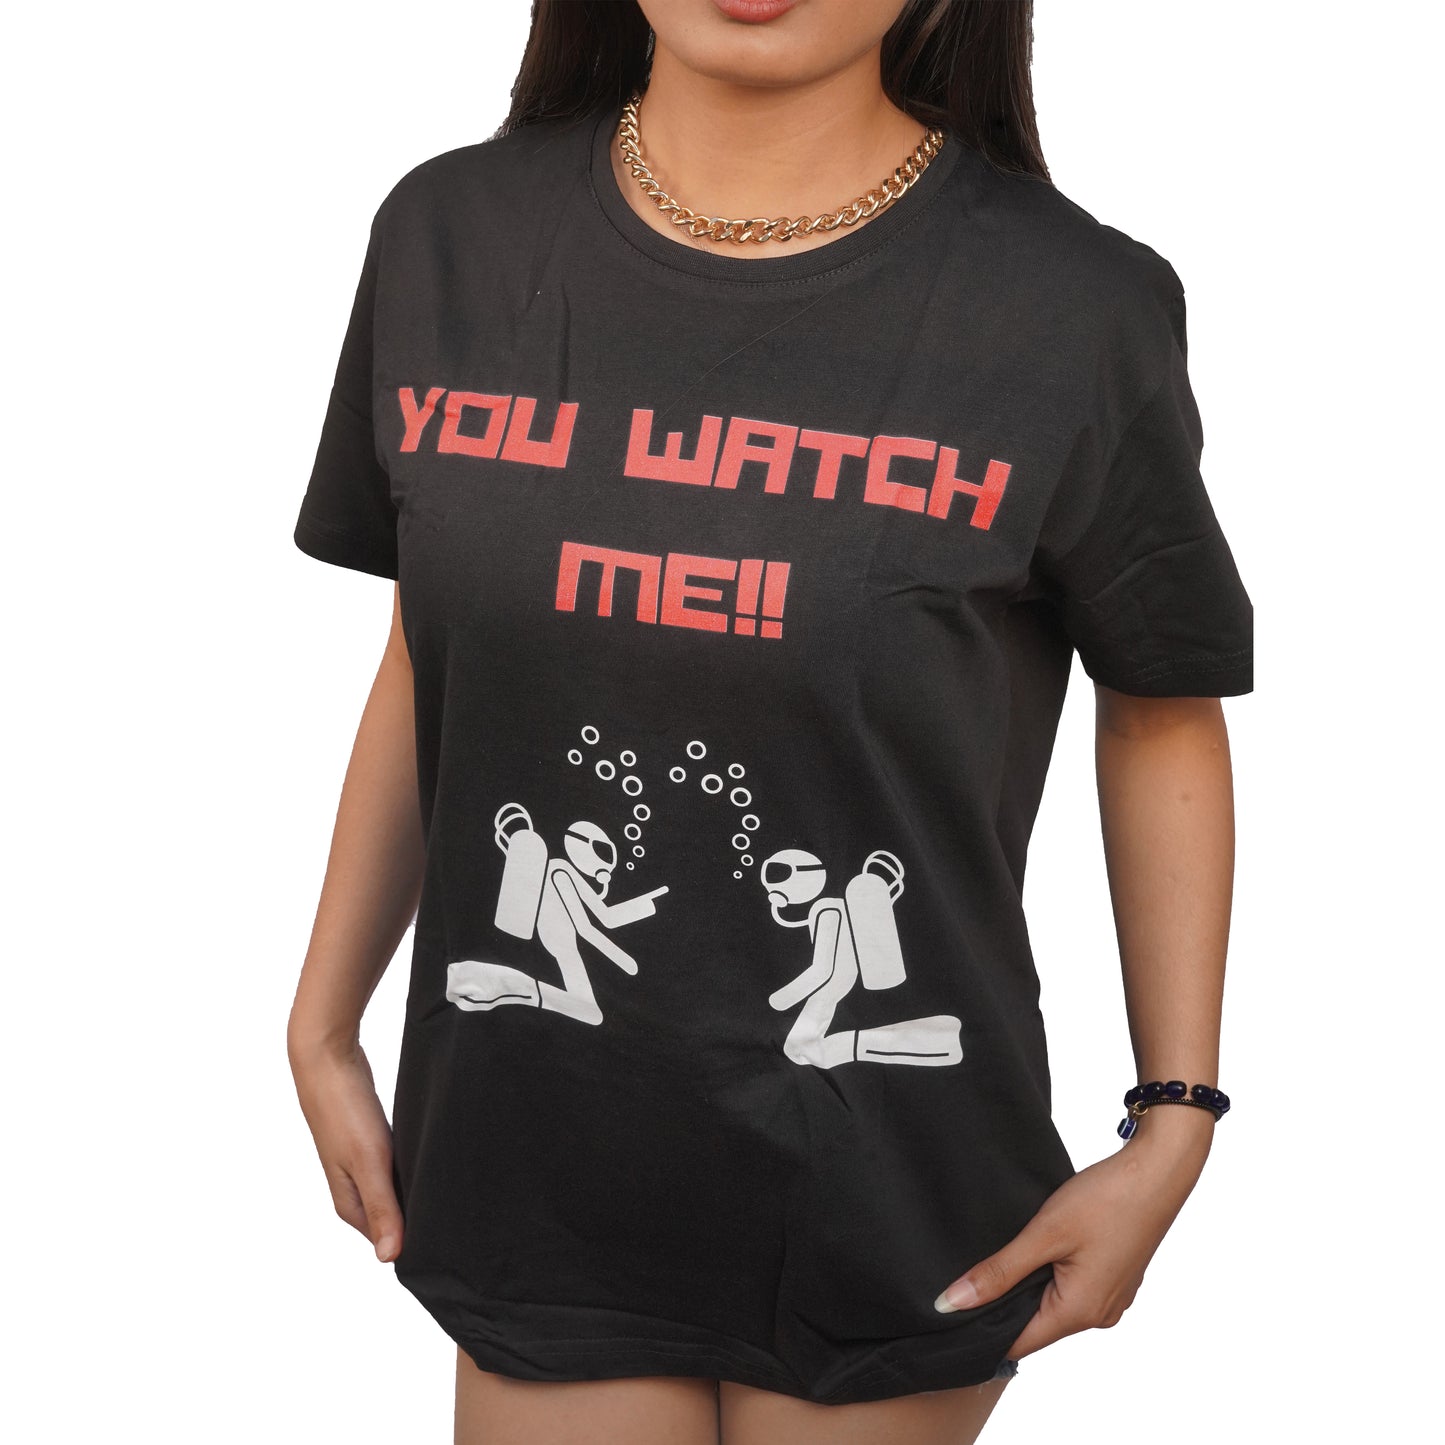 You Watch Me T-Shirt Black Color For Women